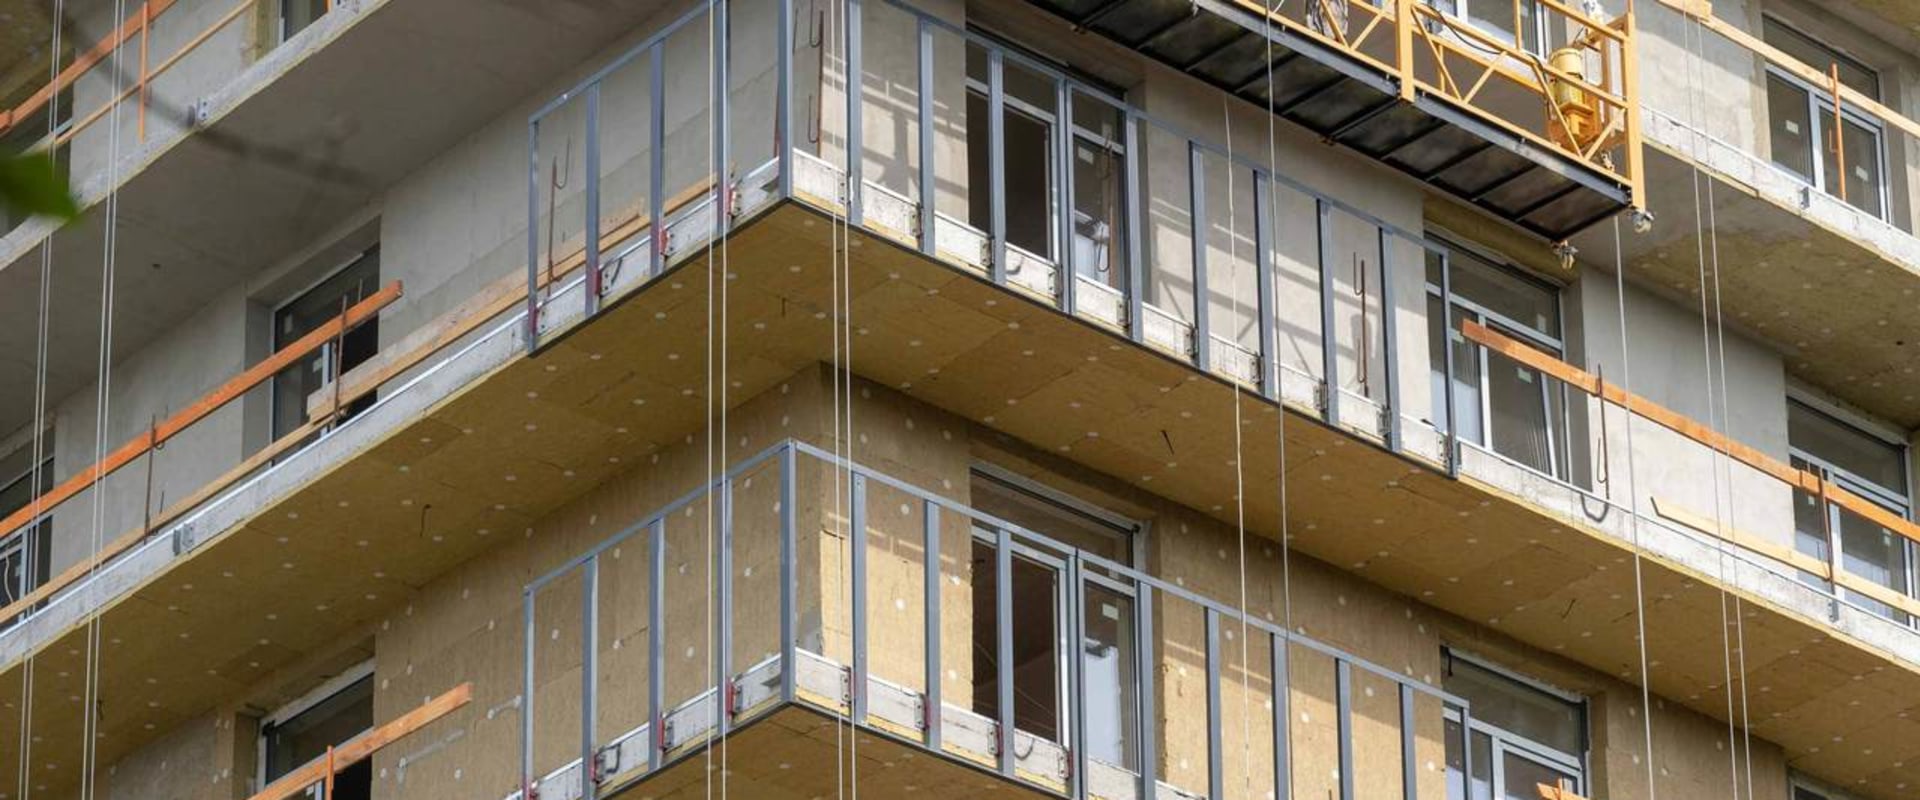 What steps can be taken to increase safety in renovating and retrofitting the structures?